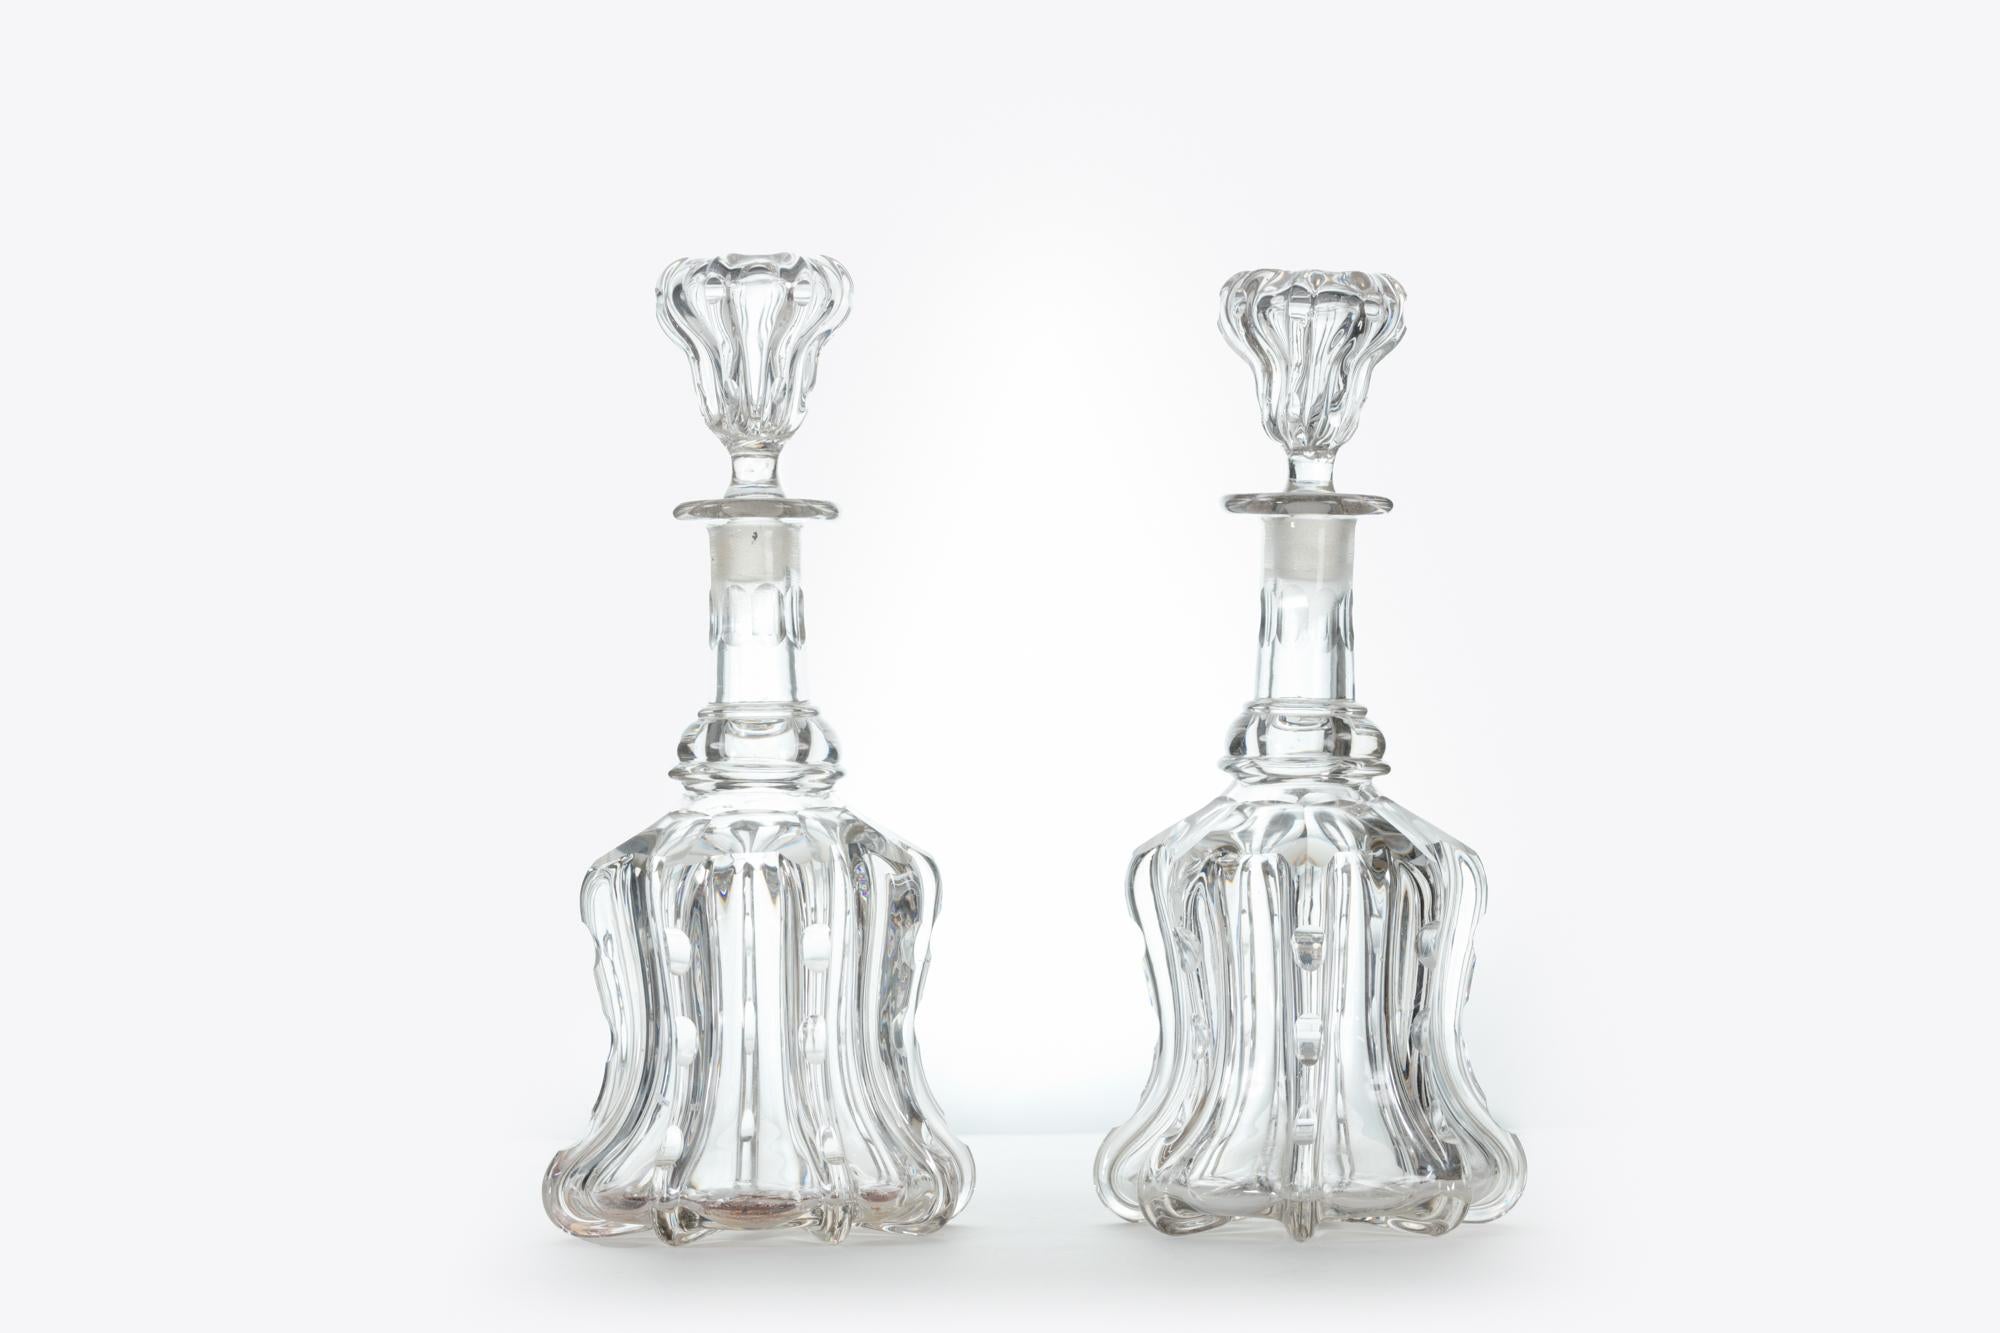 Pair of bell-shaped glass decanters decorated with moulded vertical pillars below broad shoulder rings. The stoppers are of inverted bell form also featuring moulded pillars to match the decanters. This shape is commonly known as “Newcastle